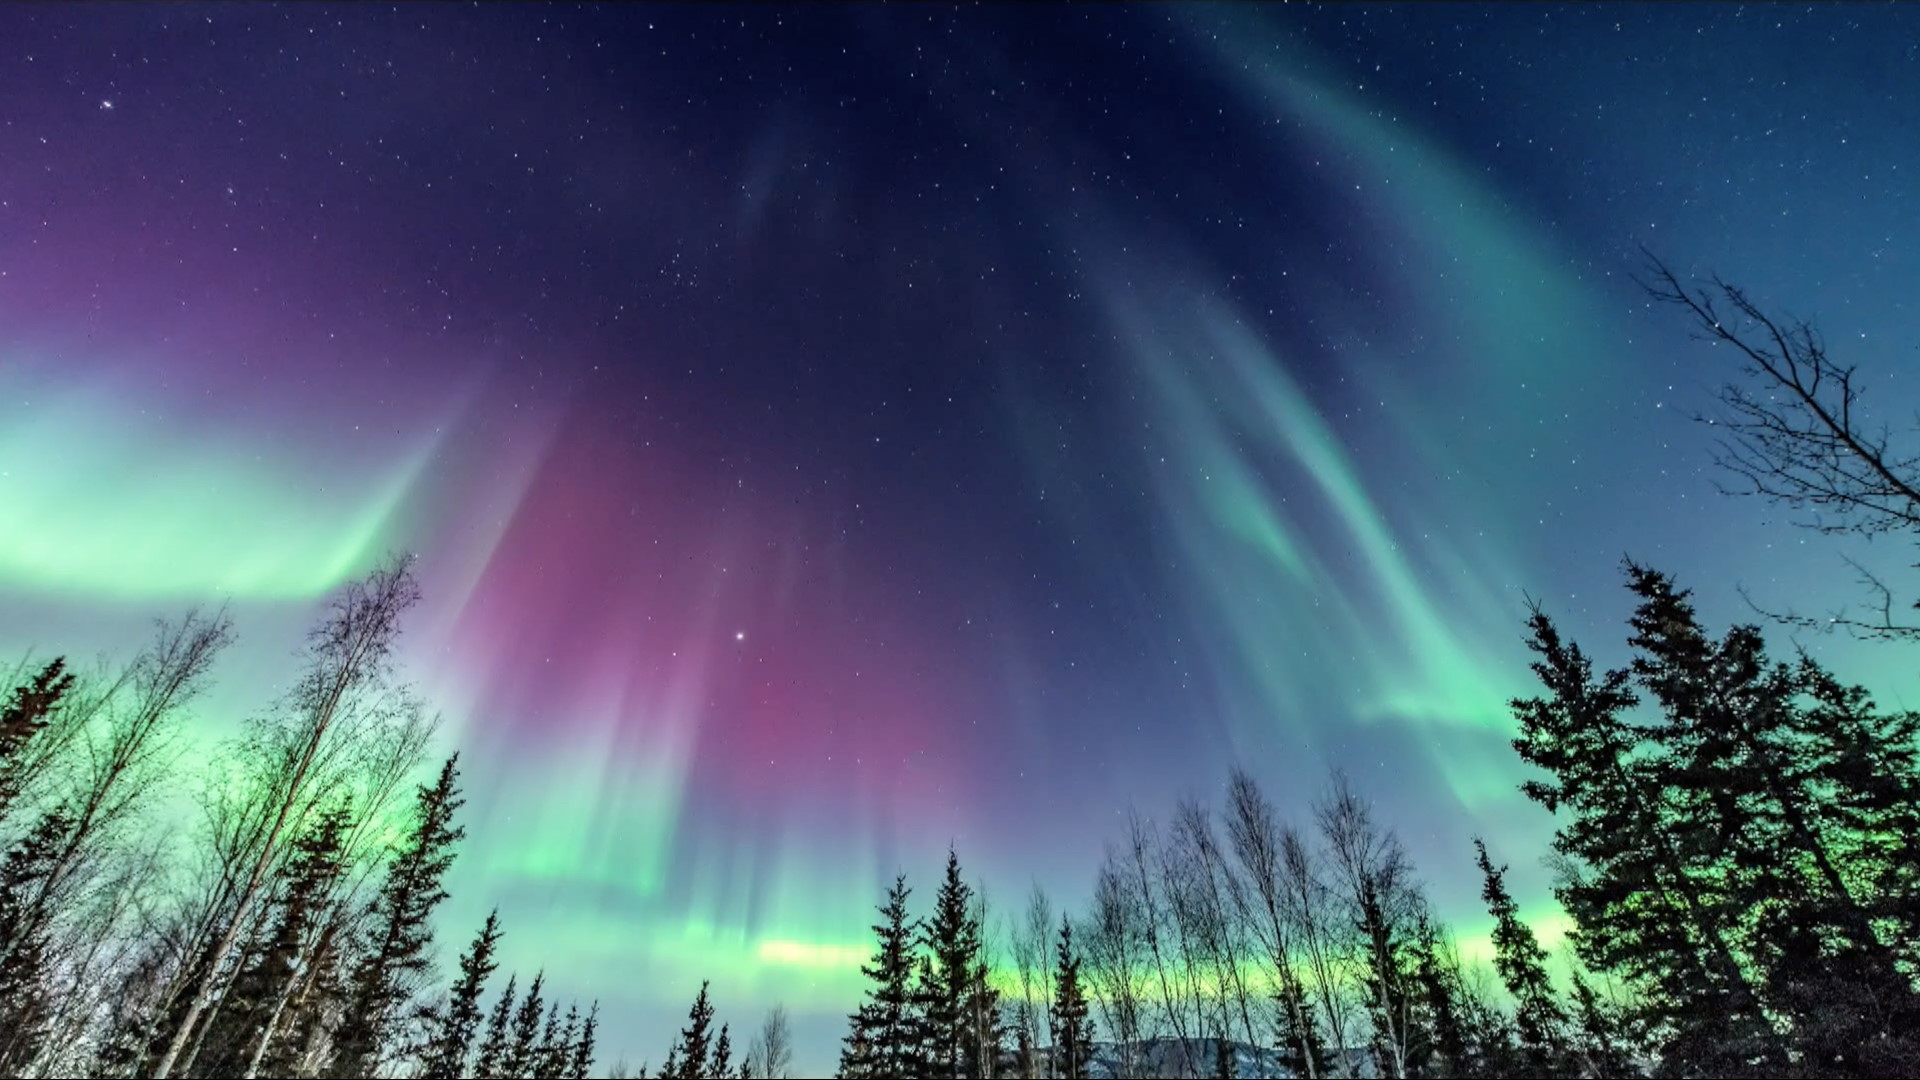 There are some amazing images of the northern lights popping up on the internet right now, but what causes it to happen? Pete Delkus explains.